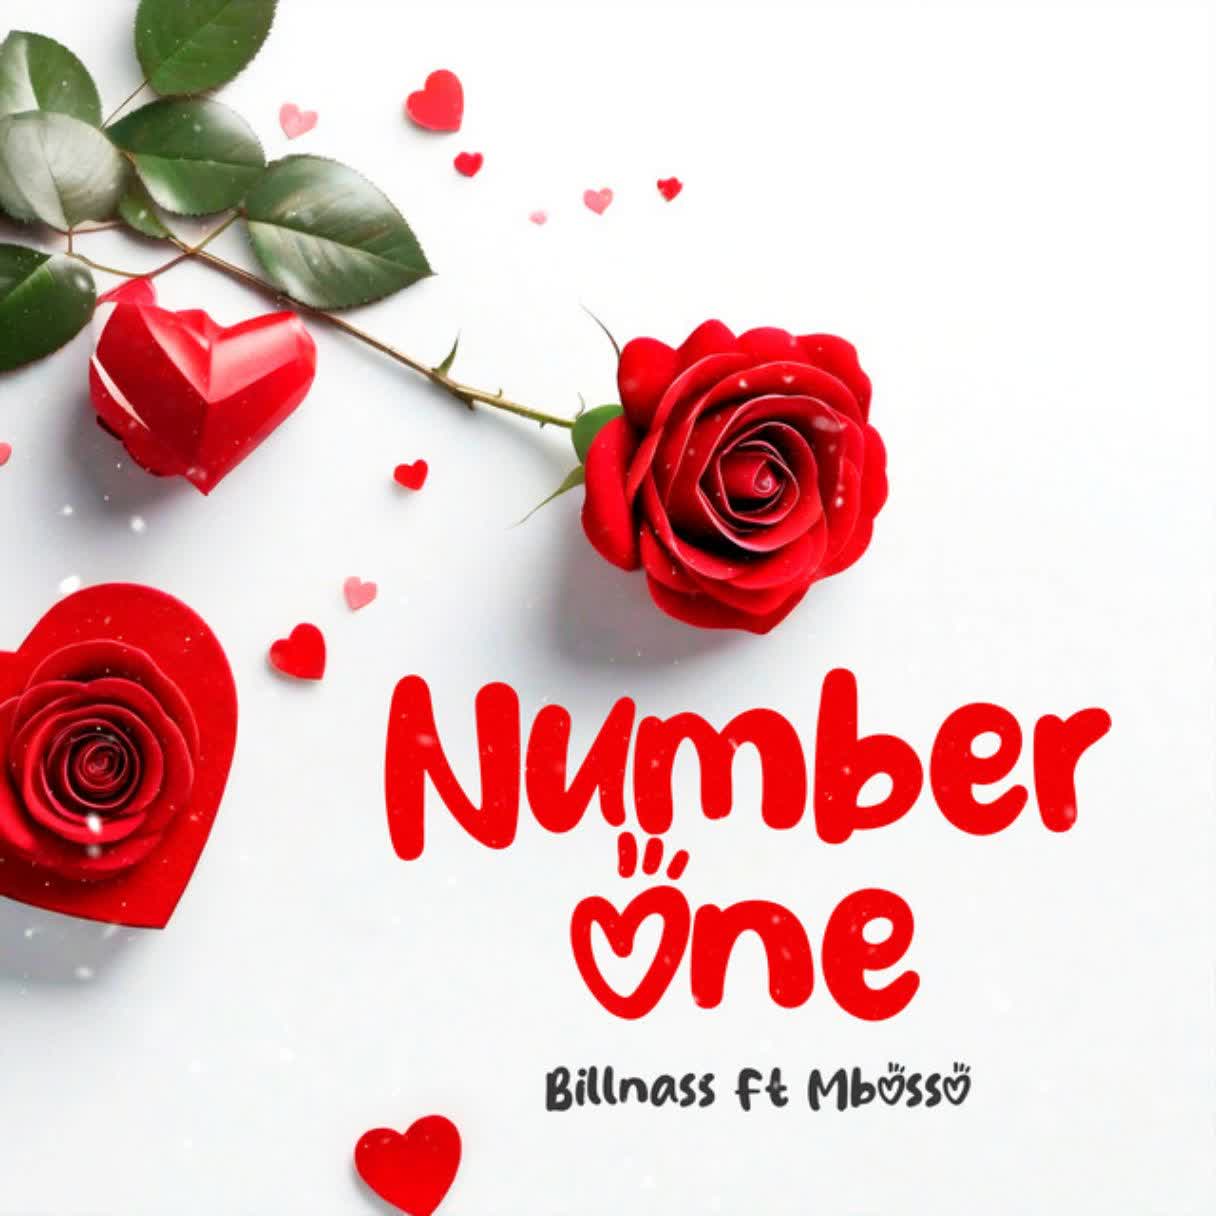 Billnass Ft Mbosso – Number One Mp3 Download